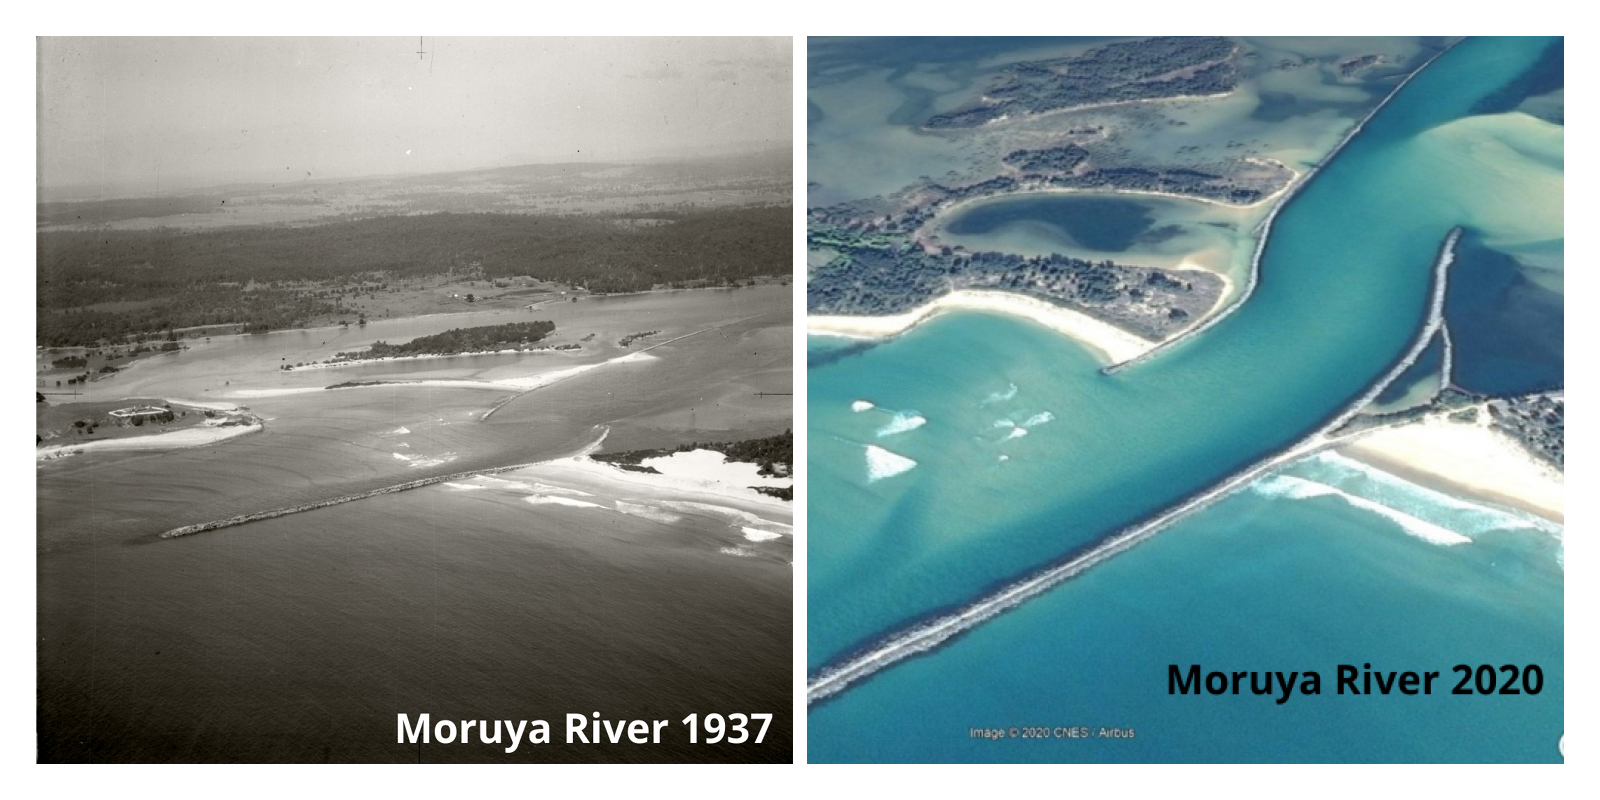 Each image shows an historical image compared with what the river mouth looks like today. There is significant difference in the river entrance when compared.  